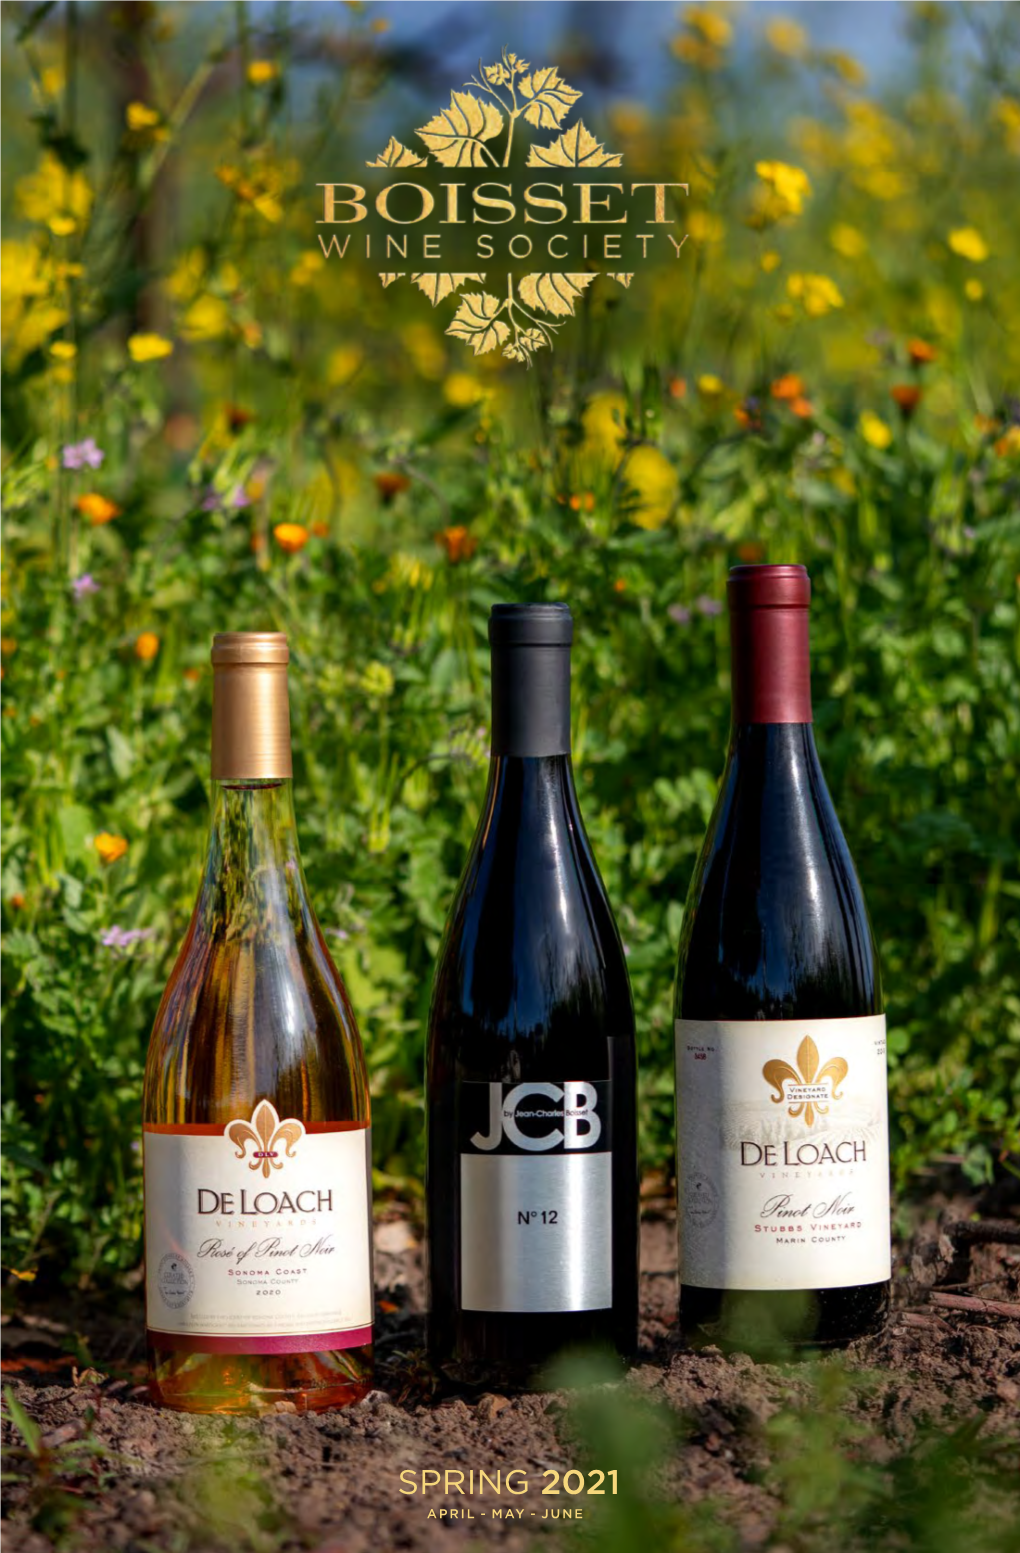 Spring 2021 April - May - June Spring Release 2021 | Featured Wines: Featured: Spring Into Pinot Noirs Legend